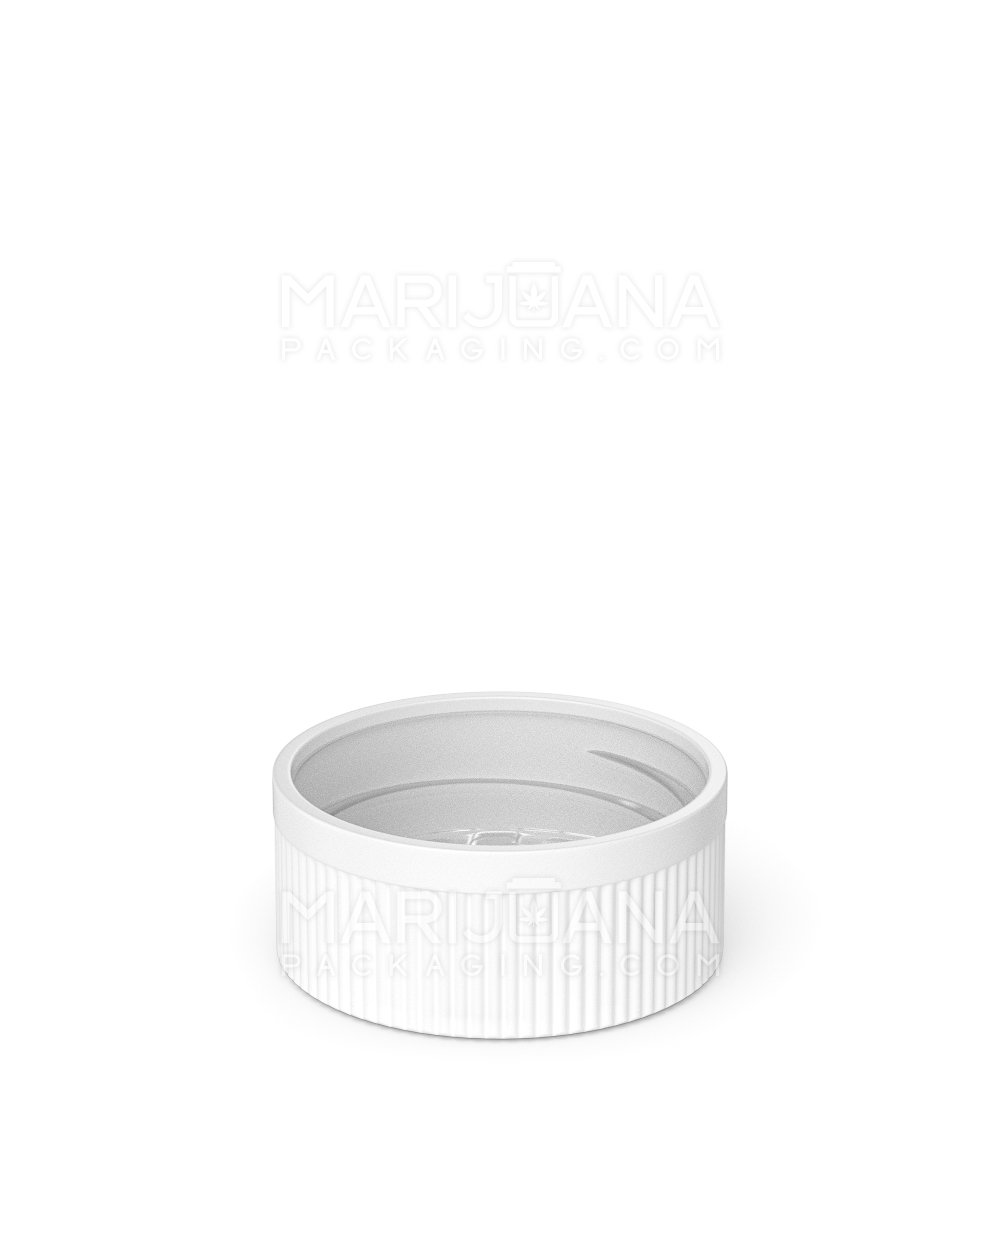 Child Resistant | Ribbed Push Down & Turn Plastic Caps | 33mm - Semi Gloss White - 252 Count - 4